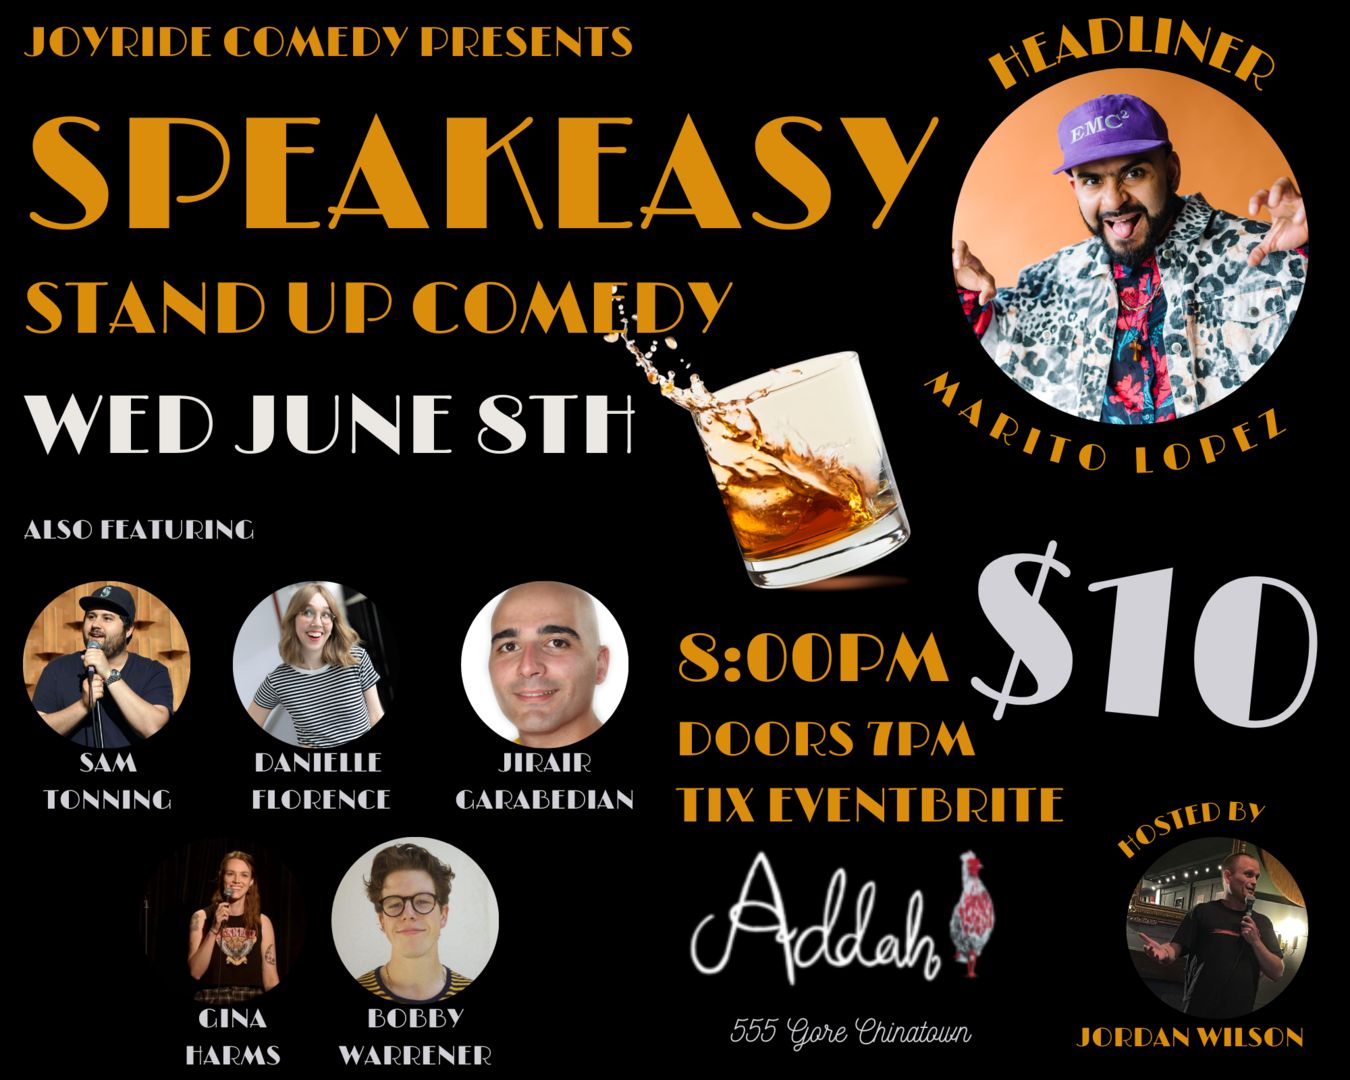 Speakeasy Stand-Up Comedy, Vancouver, British Columbia, Canada